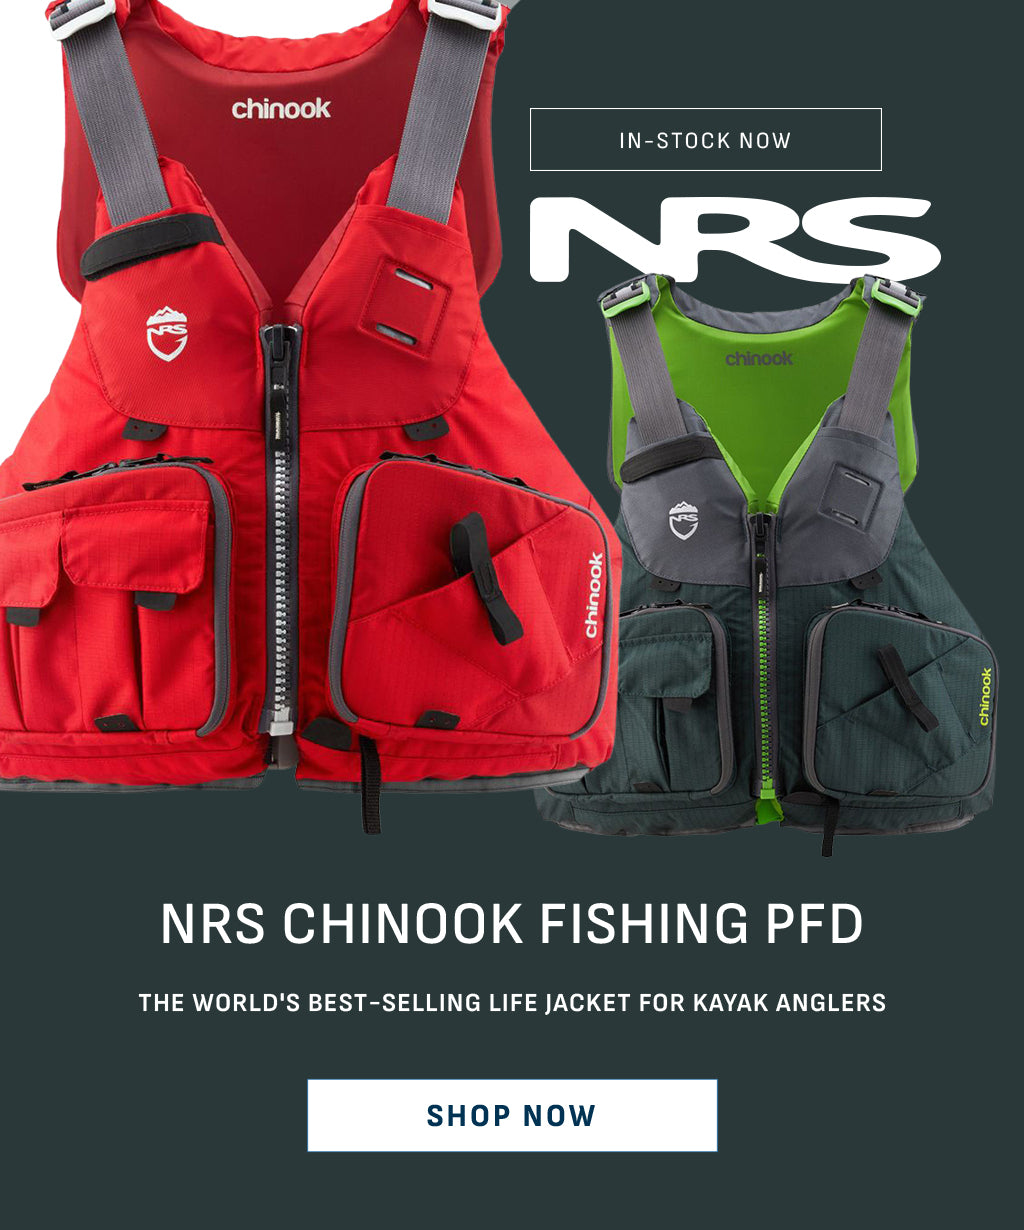 In-Stock Now: NRS® Chinook Fishing PFD: The World's Best-Selling Life Jacket for Kayak Anglers. Effective & Comfortable. Shop Now